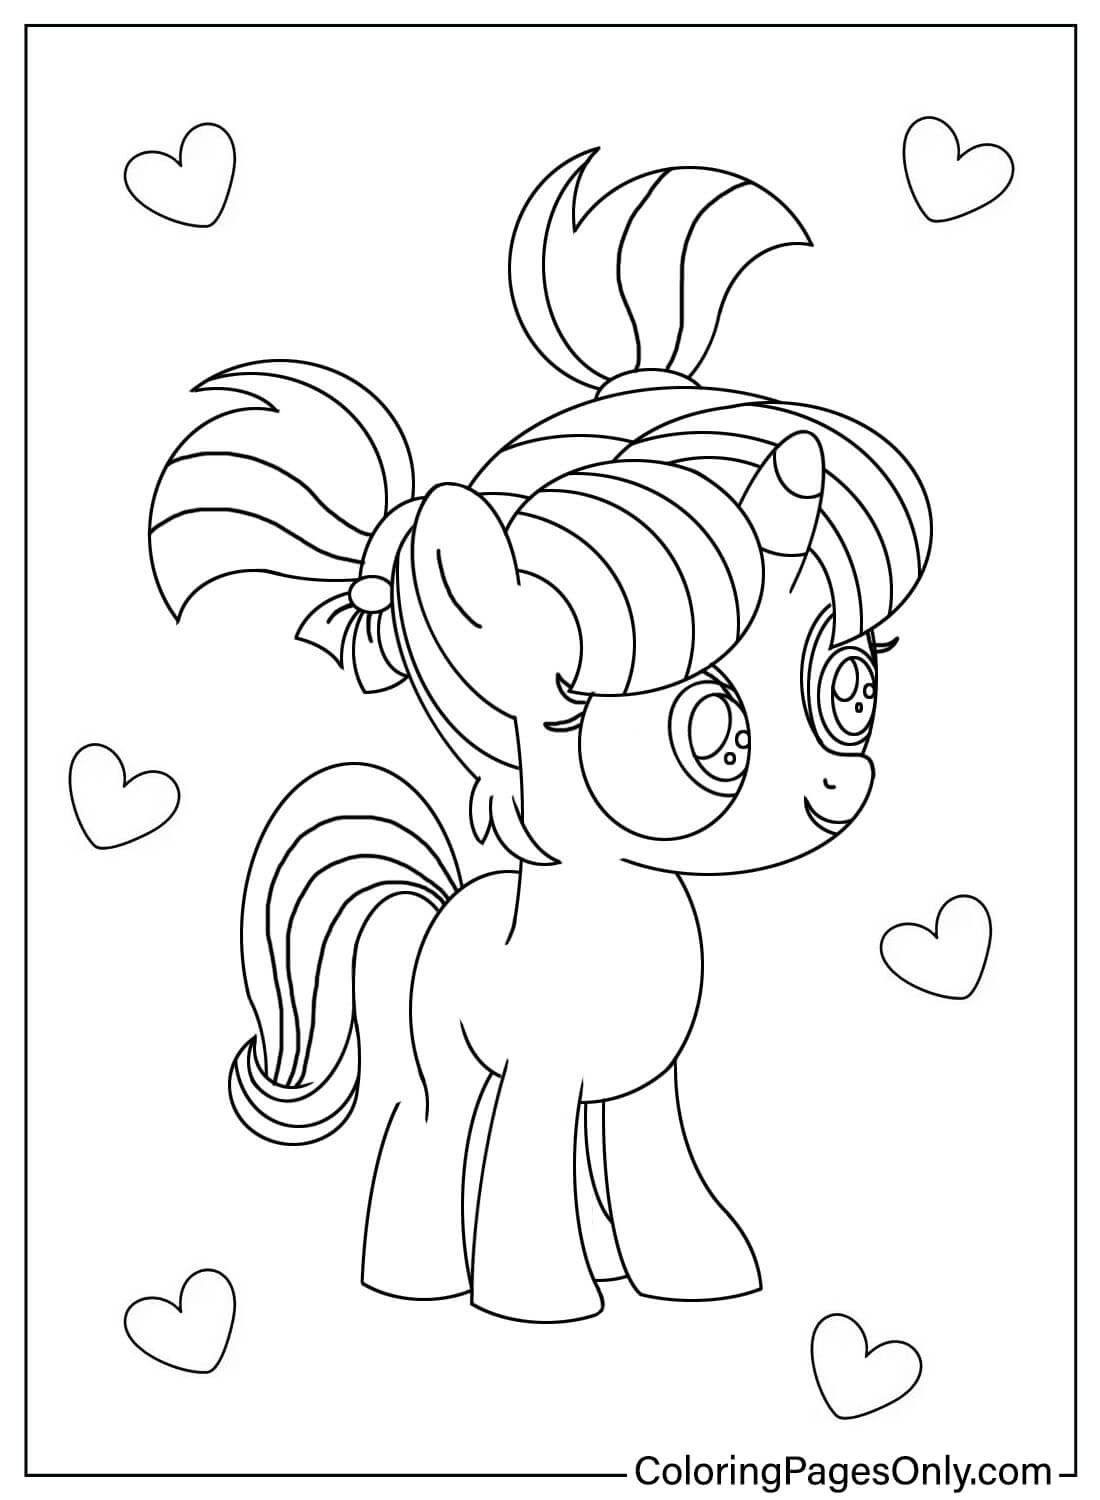 Cute Starlight Glimmer Coloring Page from Starlight Glimmer